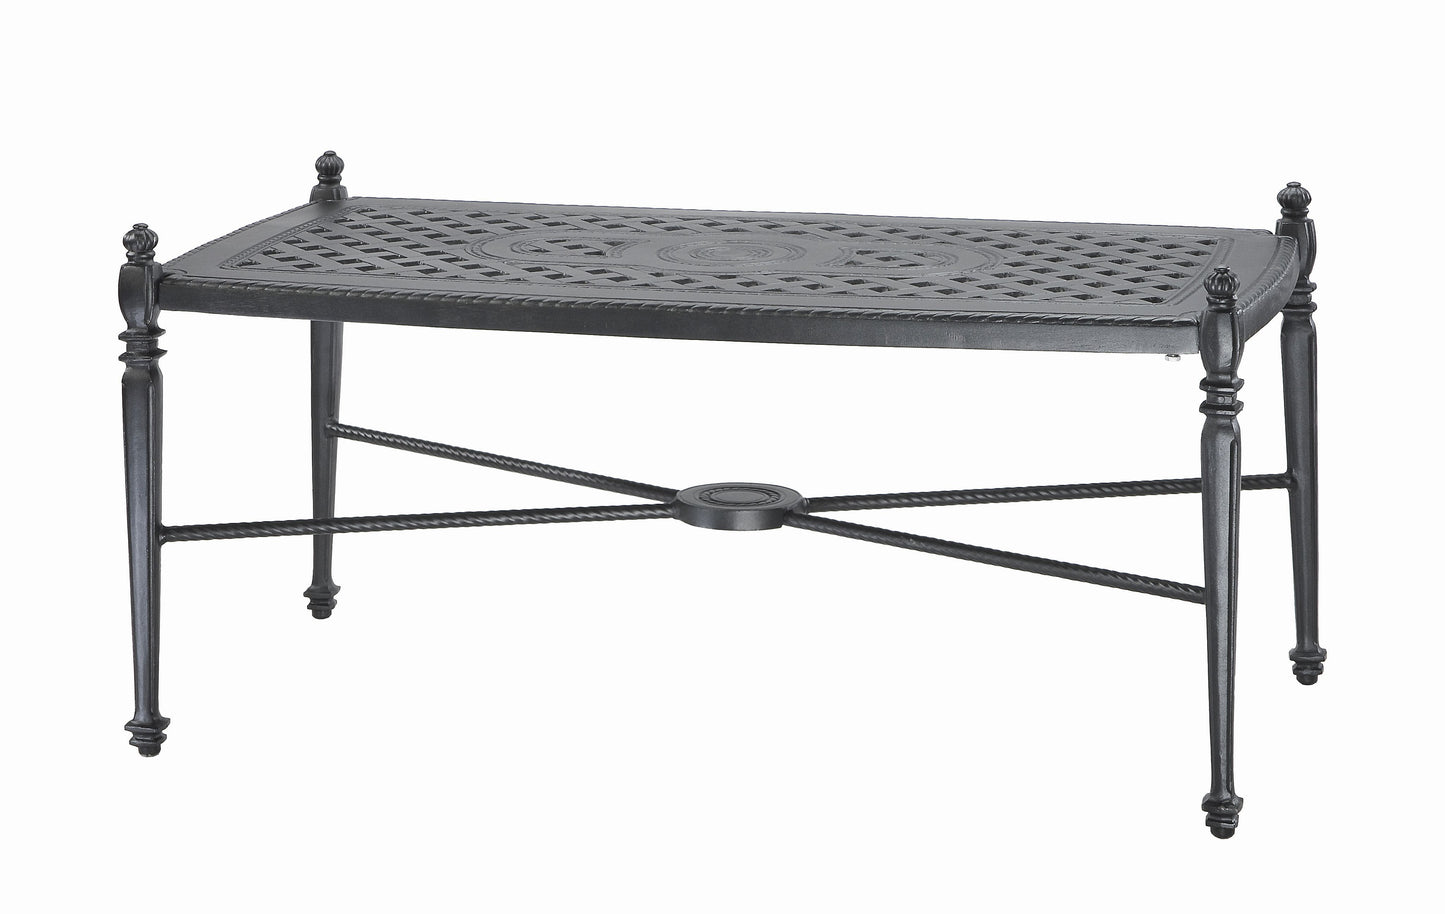 Click to View all Grand Terrace Tables & Accessories